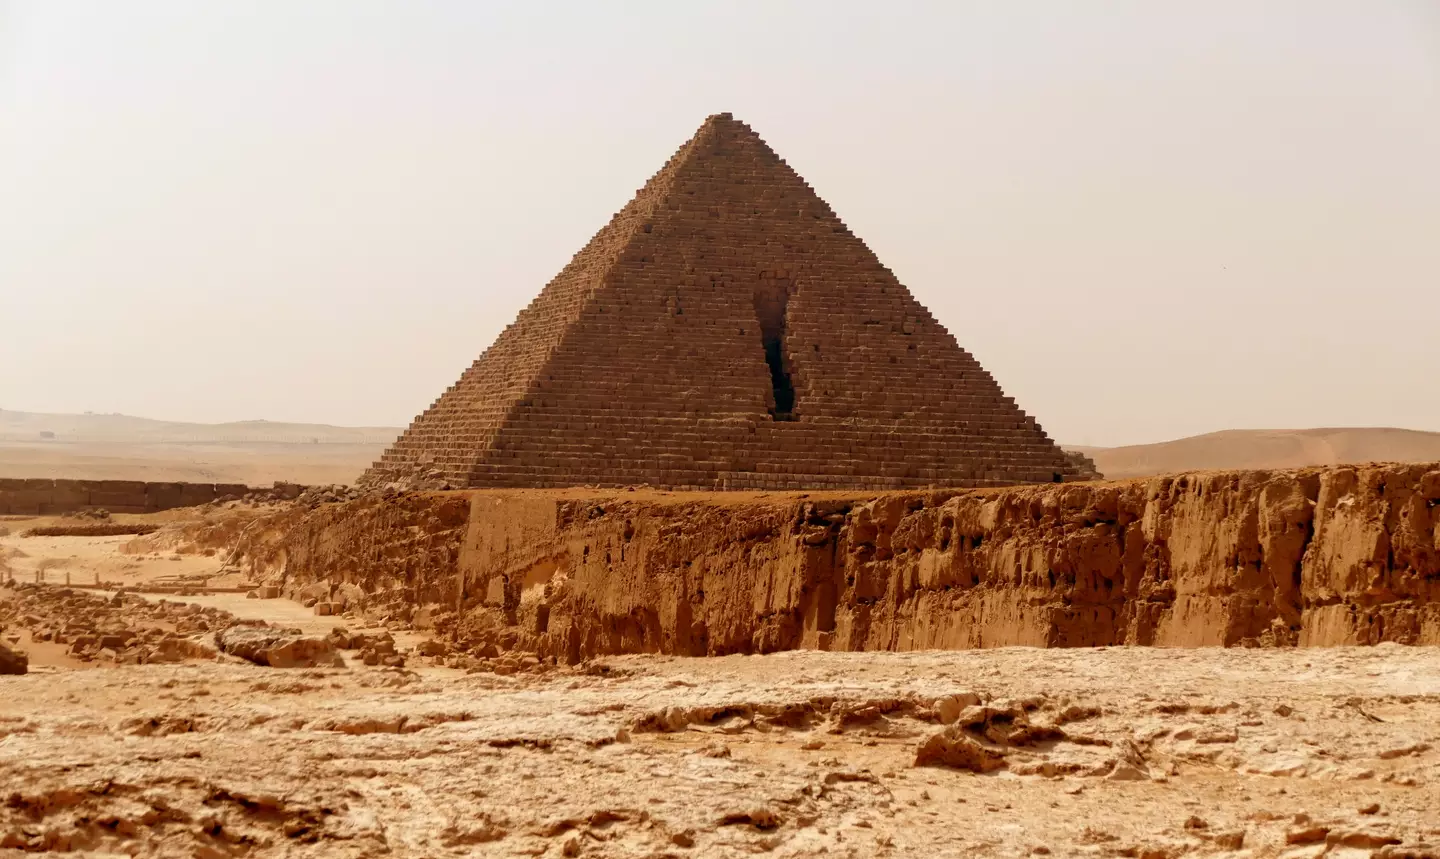 The gash in the Pyramid of Menkaure is the result of Sultan Al-Aziz Uthman's attempt to demolish it.